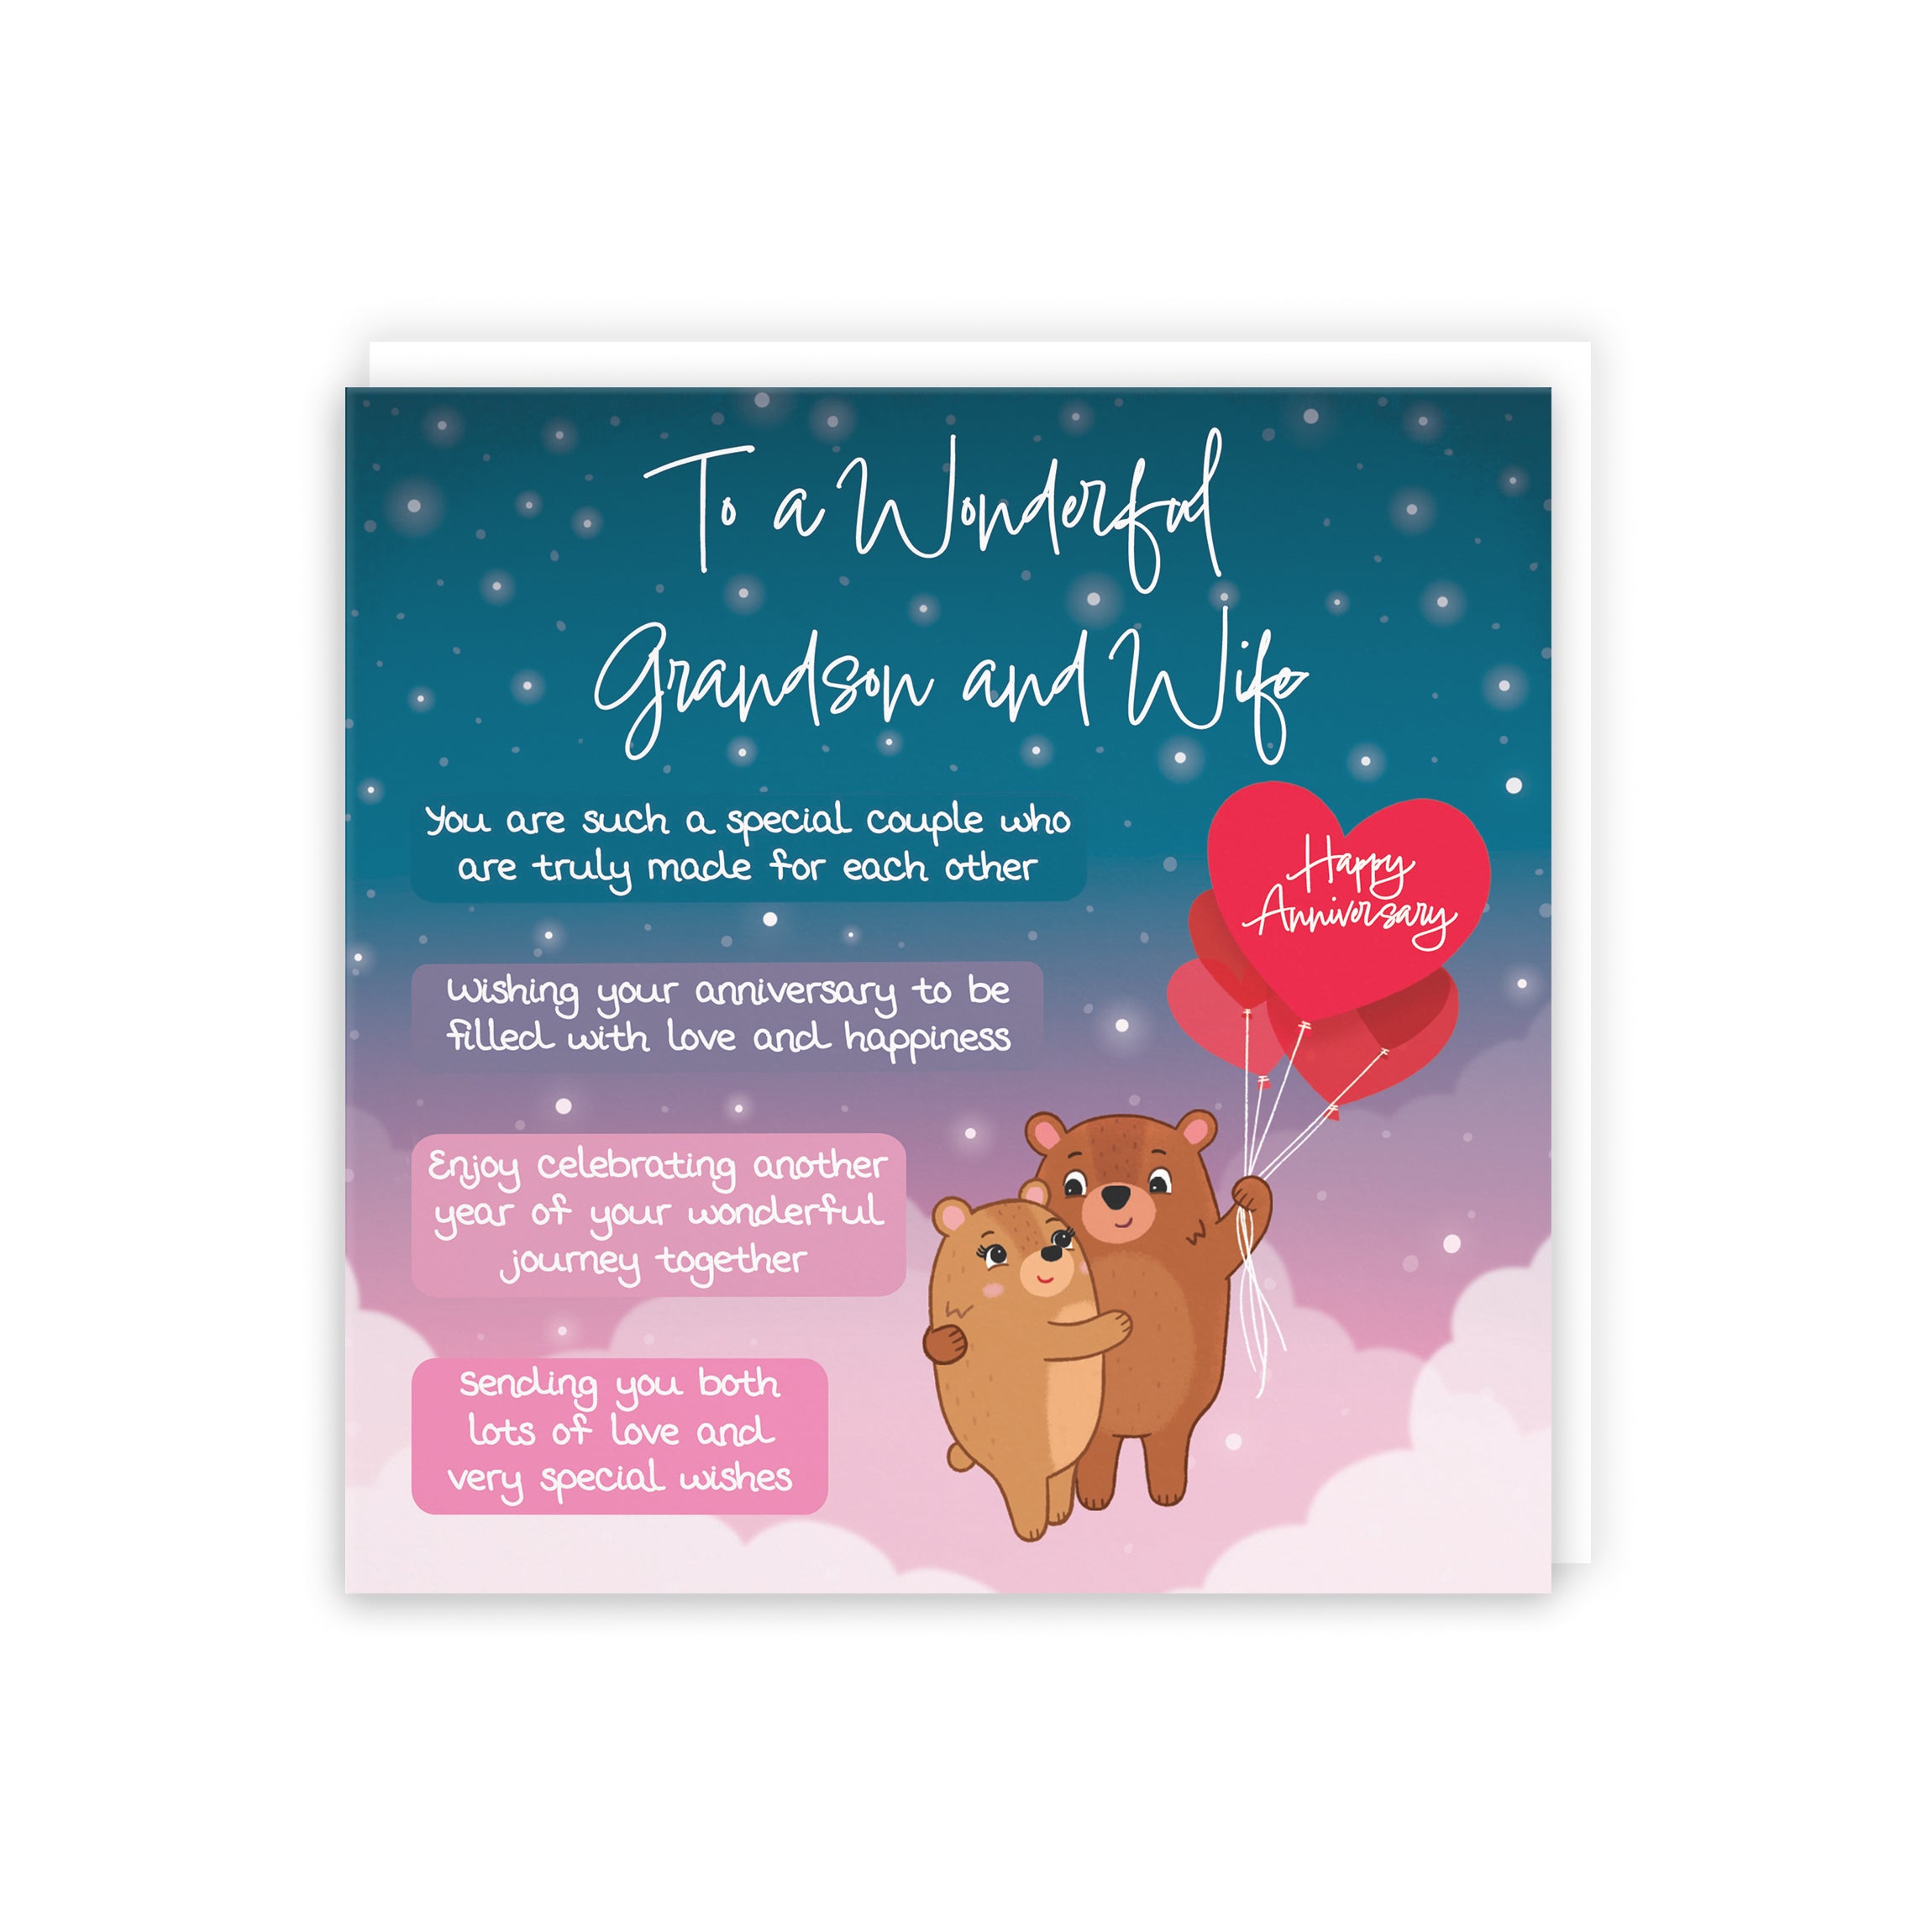 Grandson And Wife Poem Anniversary Card Starry Night Cute Bears